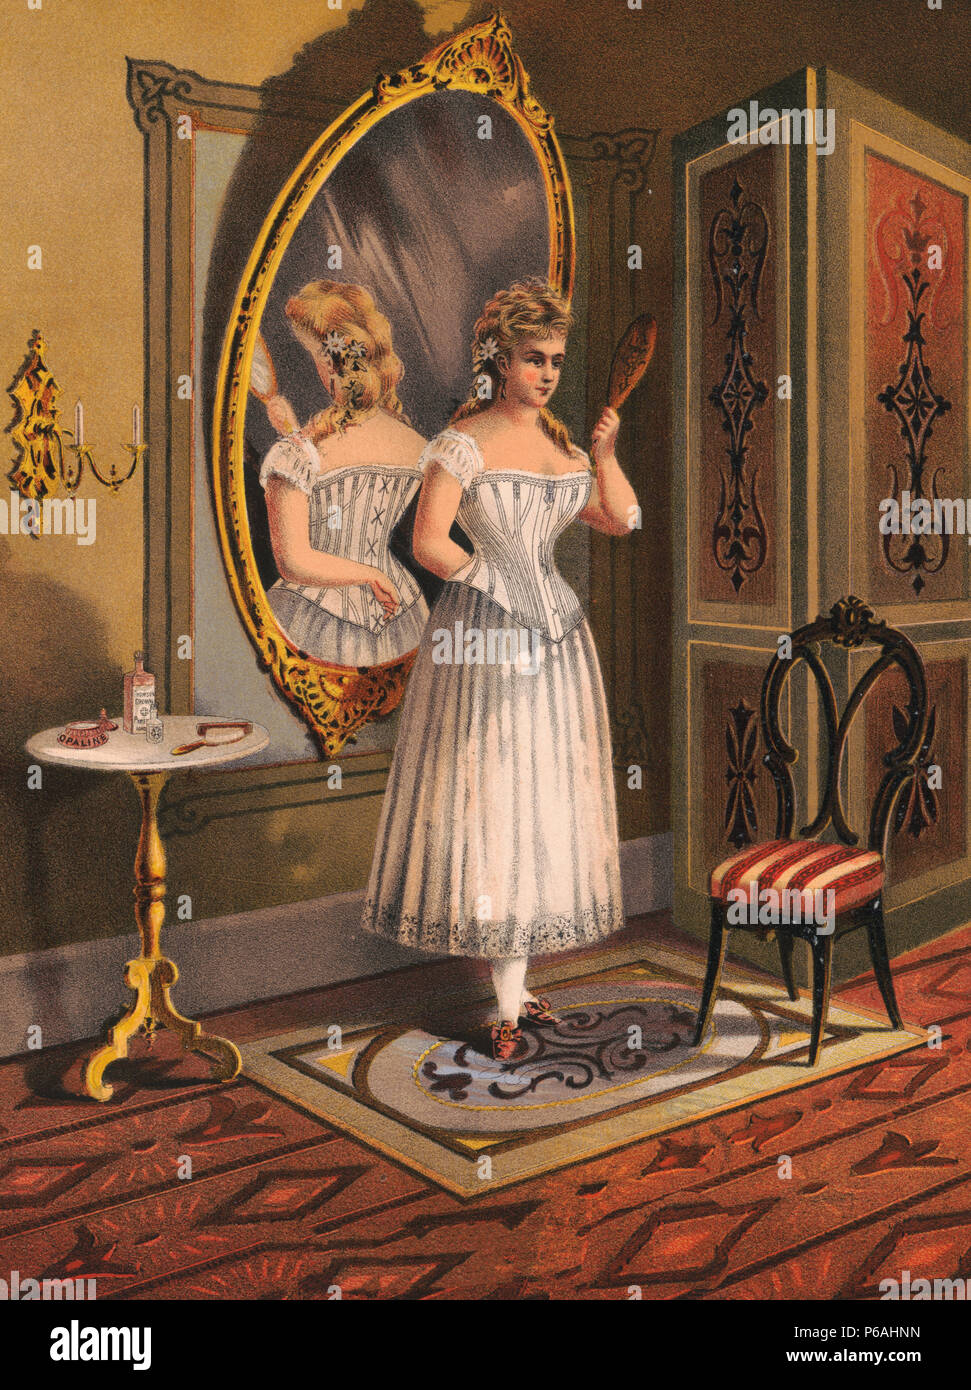 Illustration shows the interior of a room with a young woman standing with her back to a large mirror and holding a small mirror in her left hand with which she can see herself in the larger mirror Stock Photo